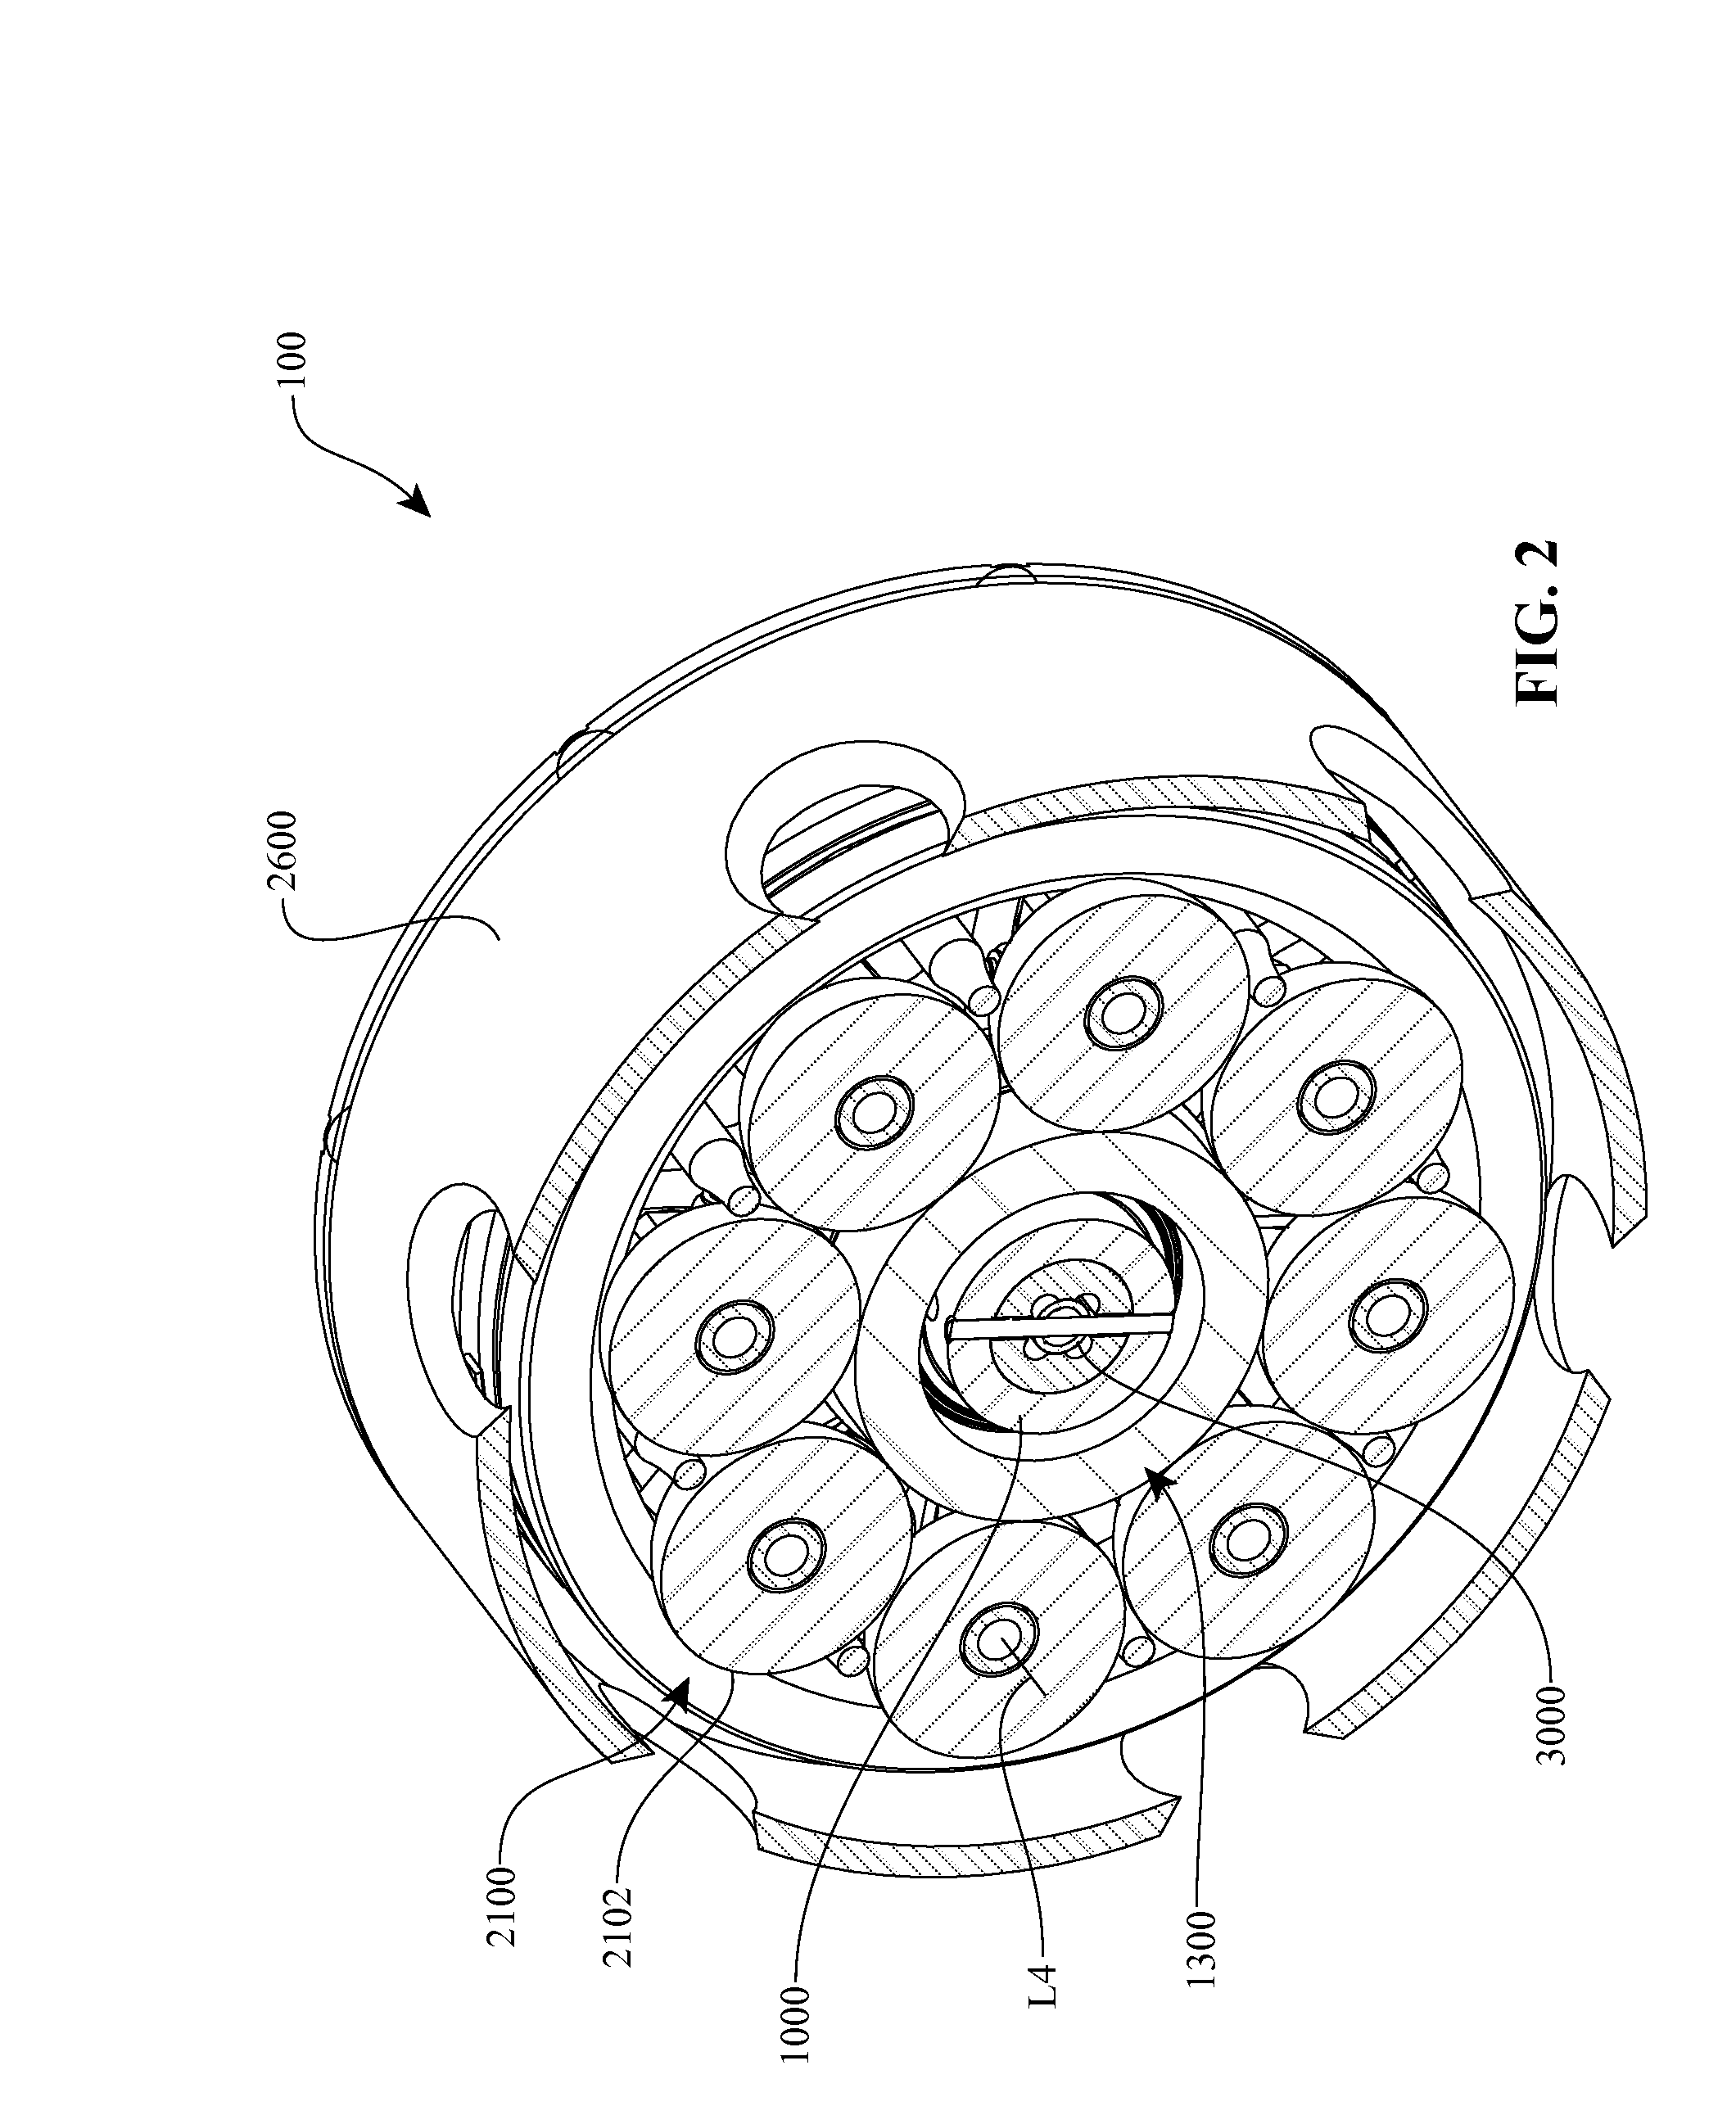 Continuously and/or infinitely variable transmissions and methods therefor